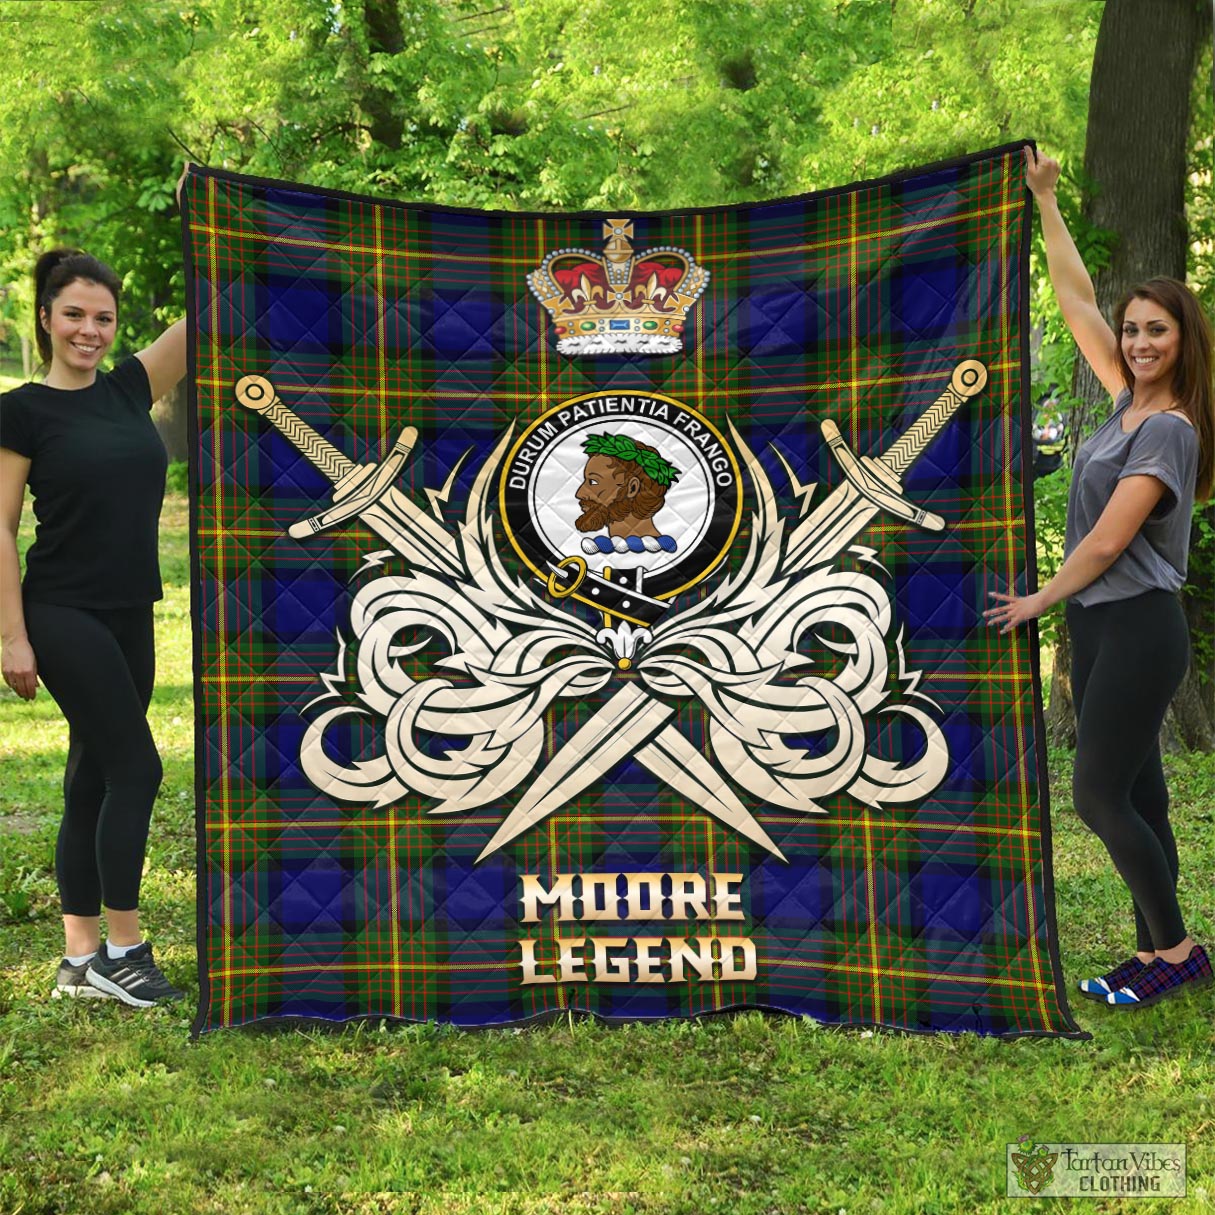 Tartan Vibes Clothing Moore Tartan Quilt with Clan Crest and the Golden Sword of Courageous Legacy